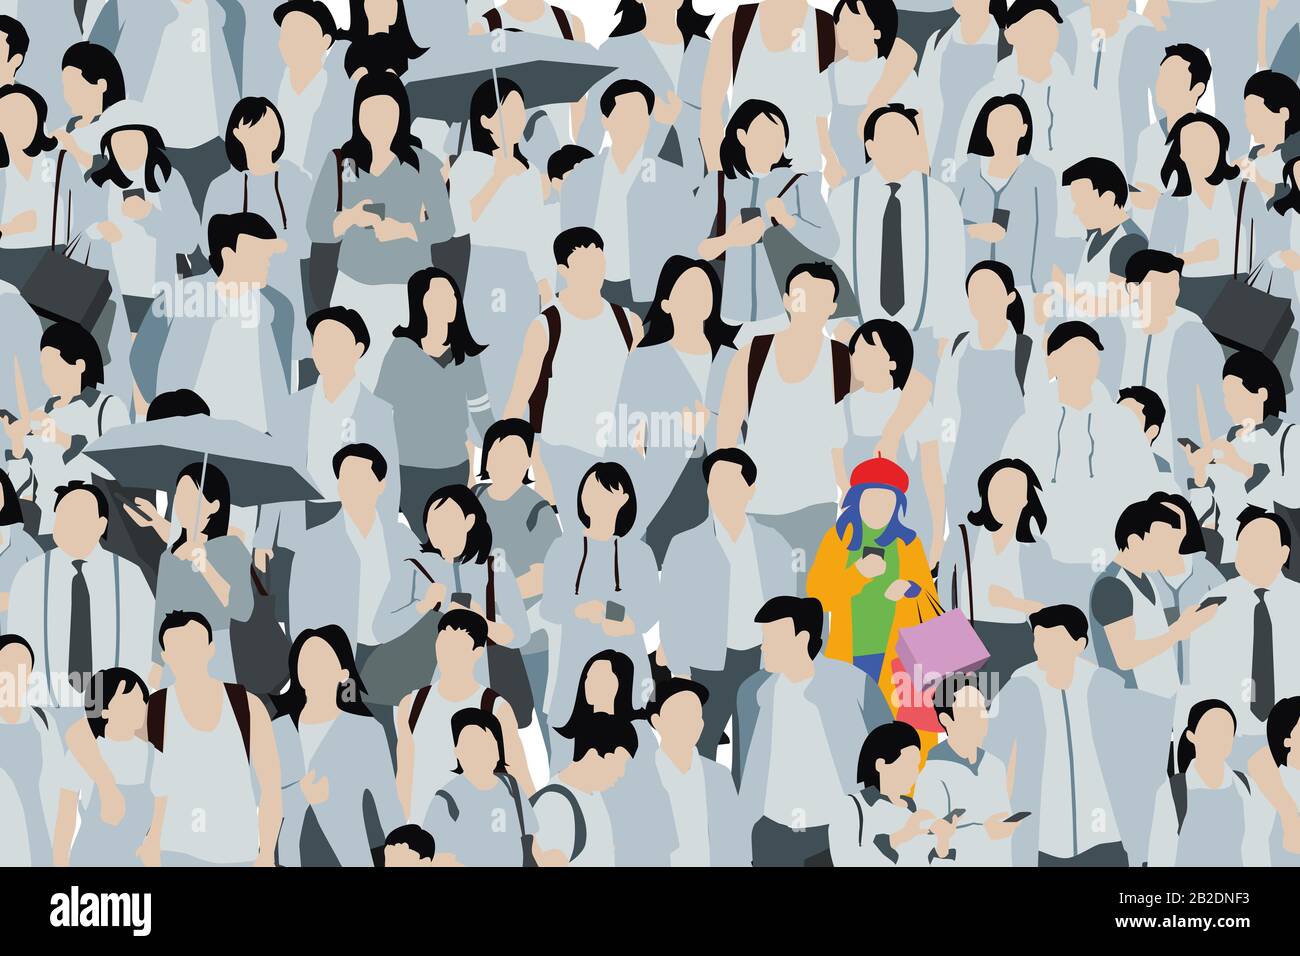 Girl standing out of the crowd wearing colorful clothes, people illustration Stock Photo